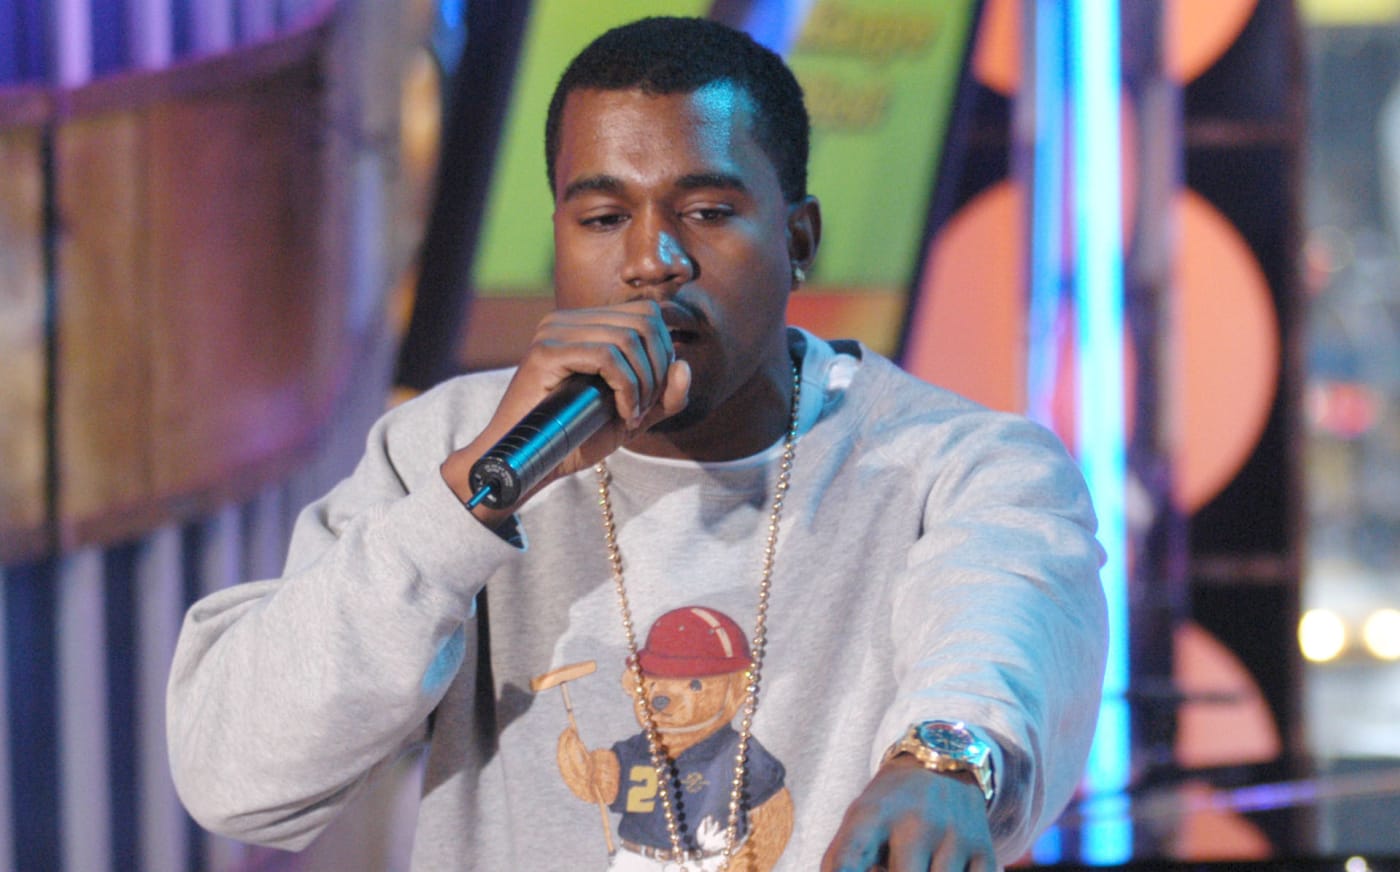 Kanye West performs at MTV's 'TRL' in 2004